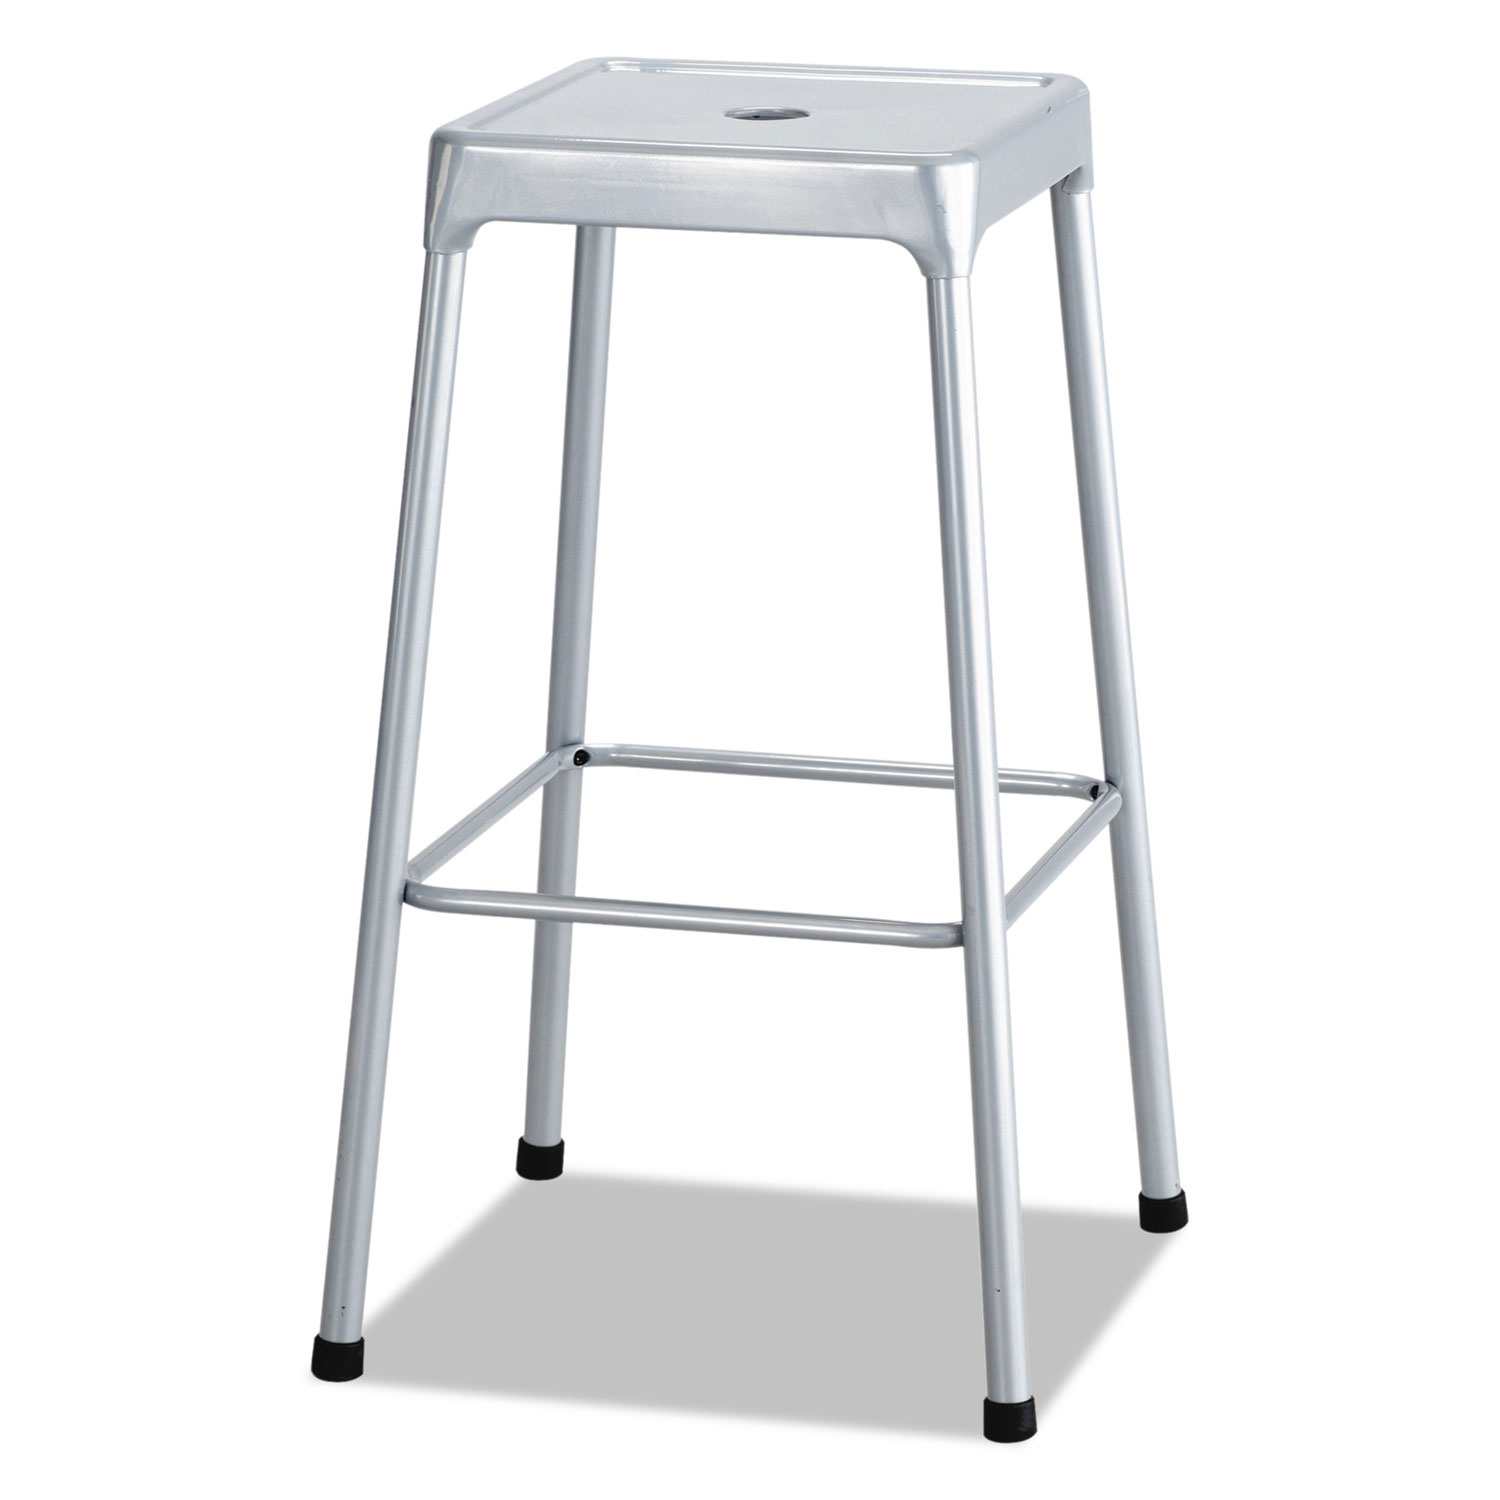  Safco 6606SL Bar-Height Steel Stool, 29 Seat Height, Supports up to 250 lbs., Silver Seat/Silver Back, Silver Base (SAF6606SL) 